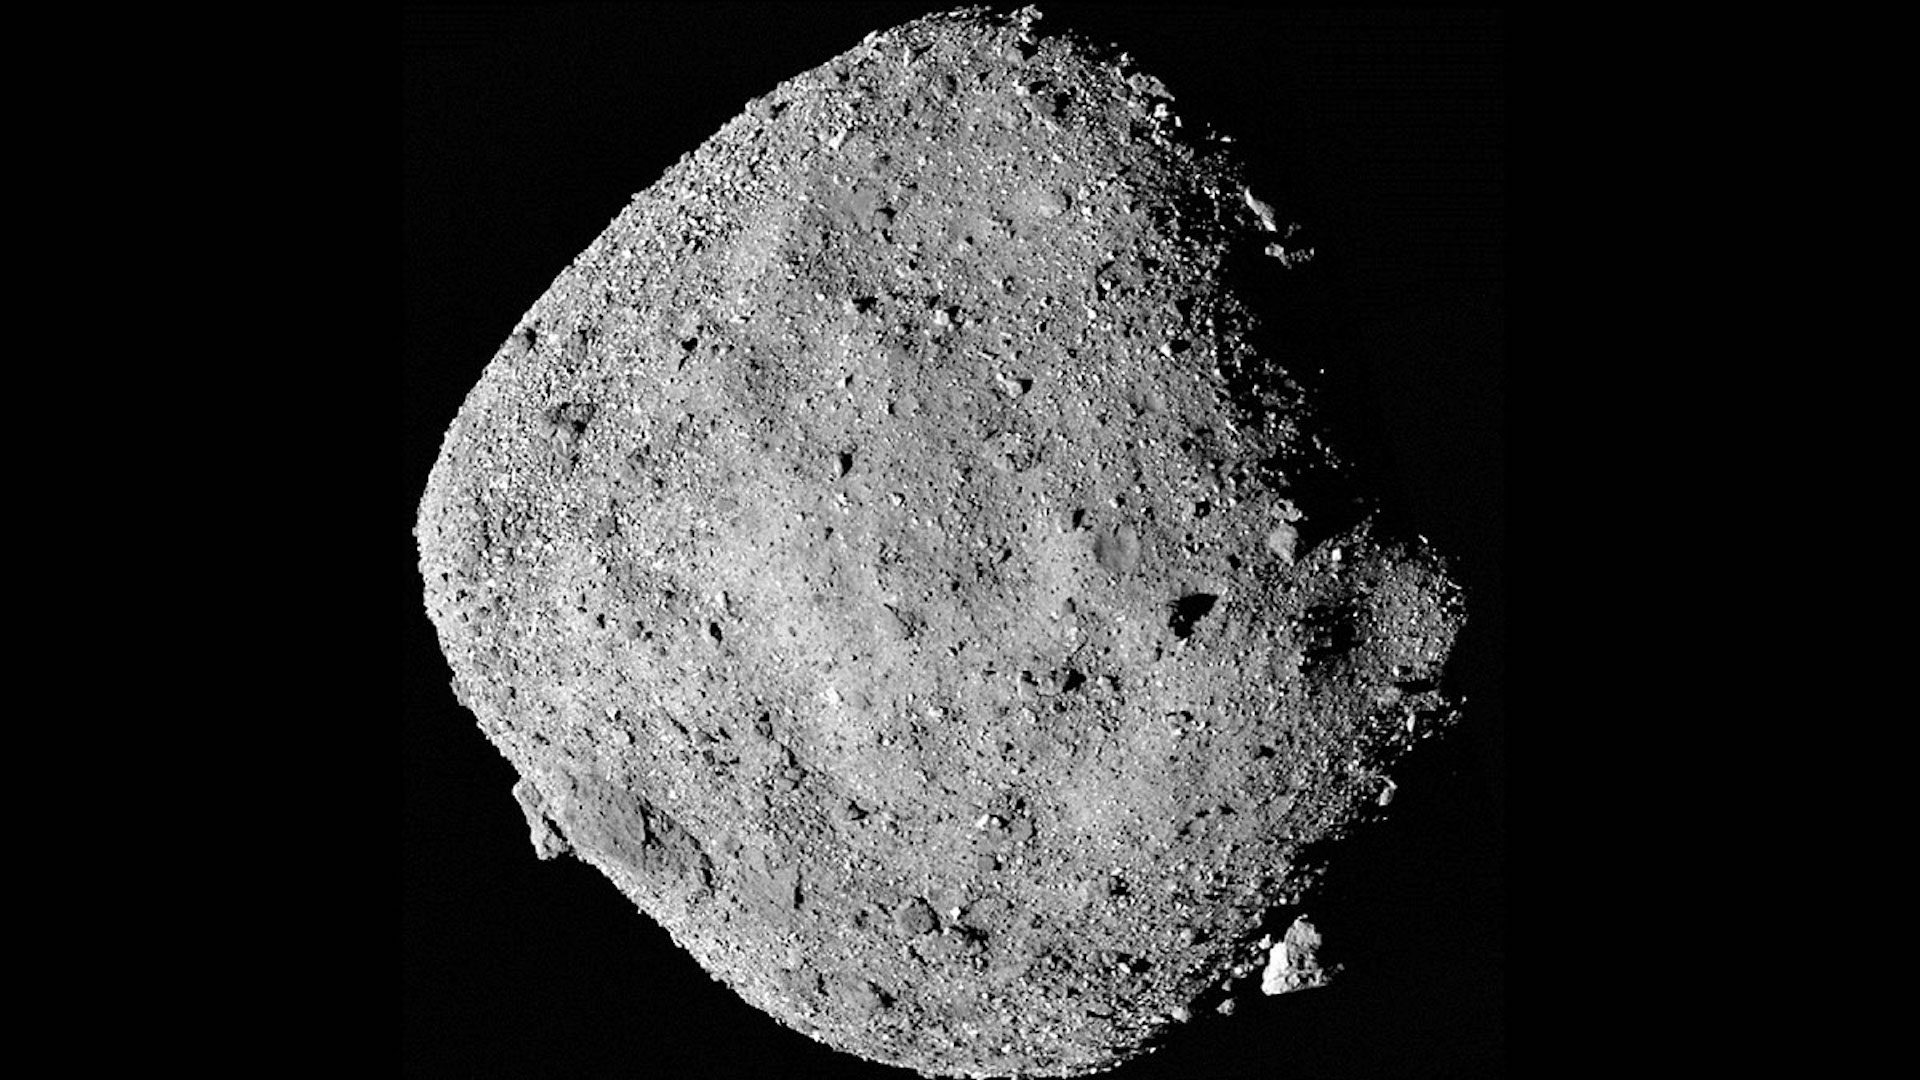 Mosaic image of asteroid Bennu is composed of 12 images collected on Dec. 2, 2018 by the OSIRIS-REx spacecraft from a range of 15 miles